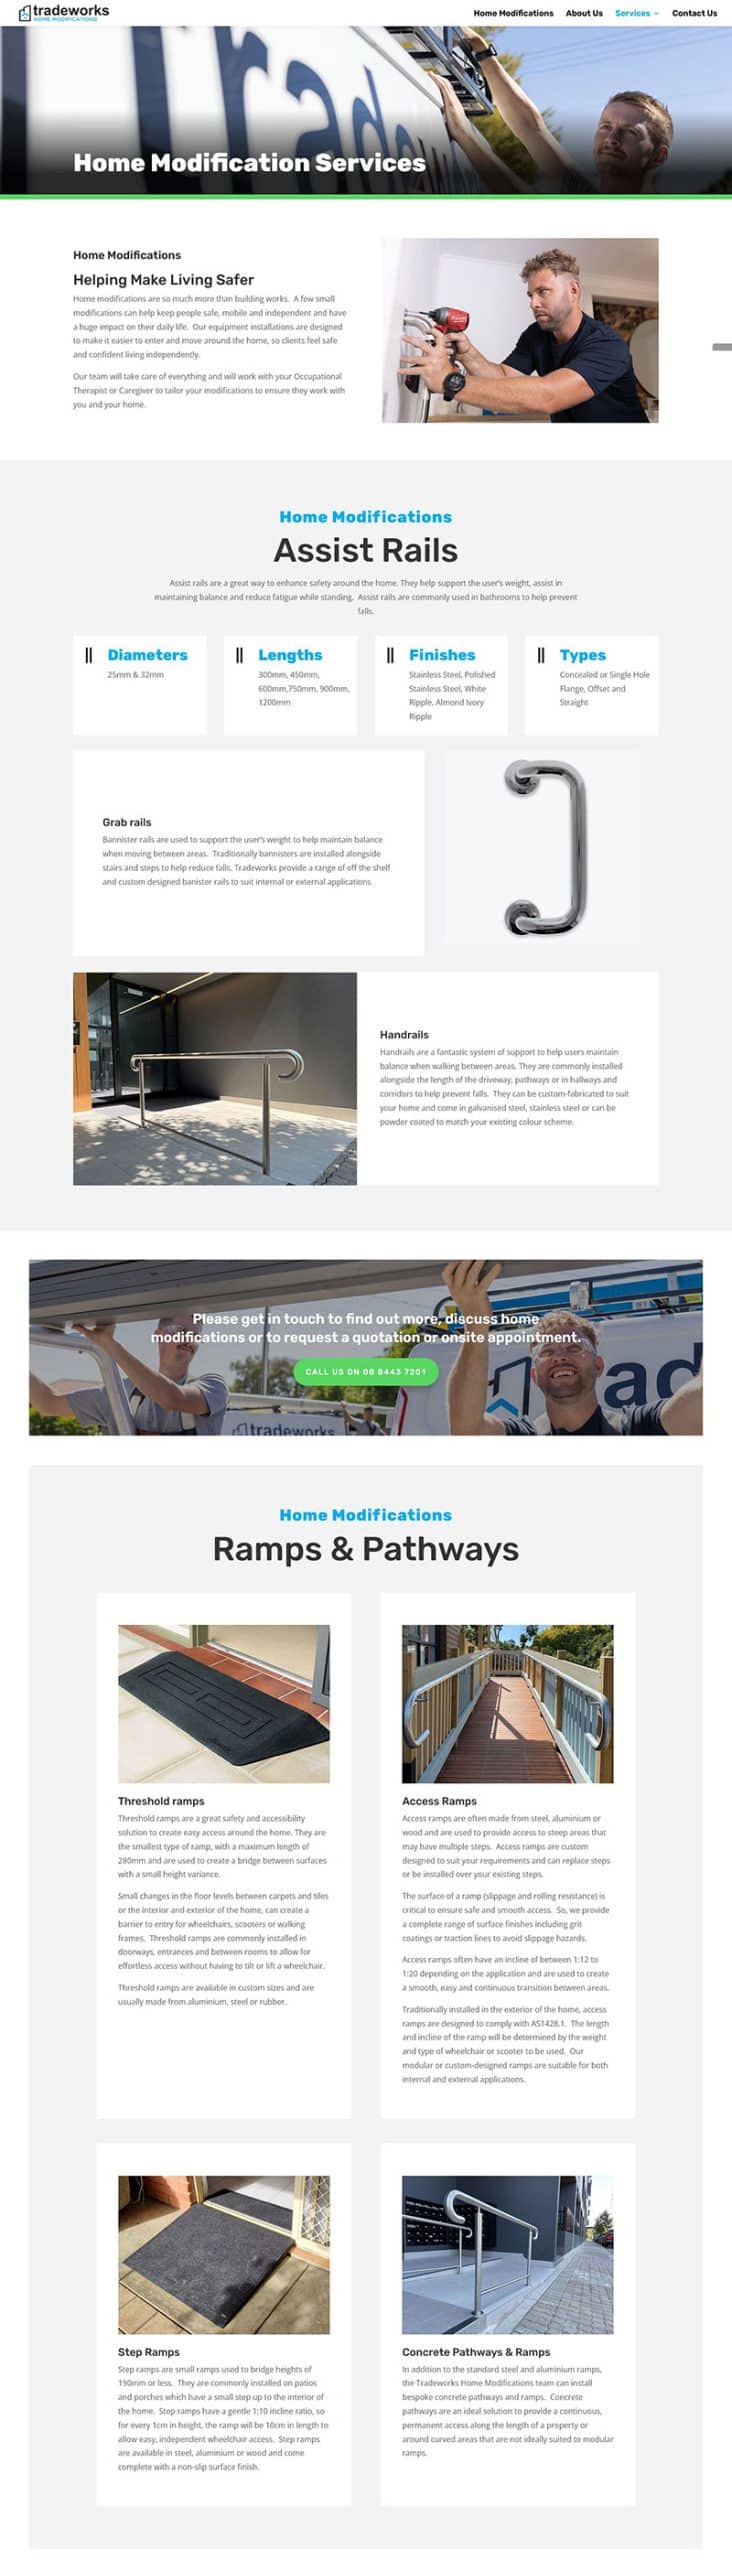 website design for home modifiction builder business in adelaide